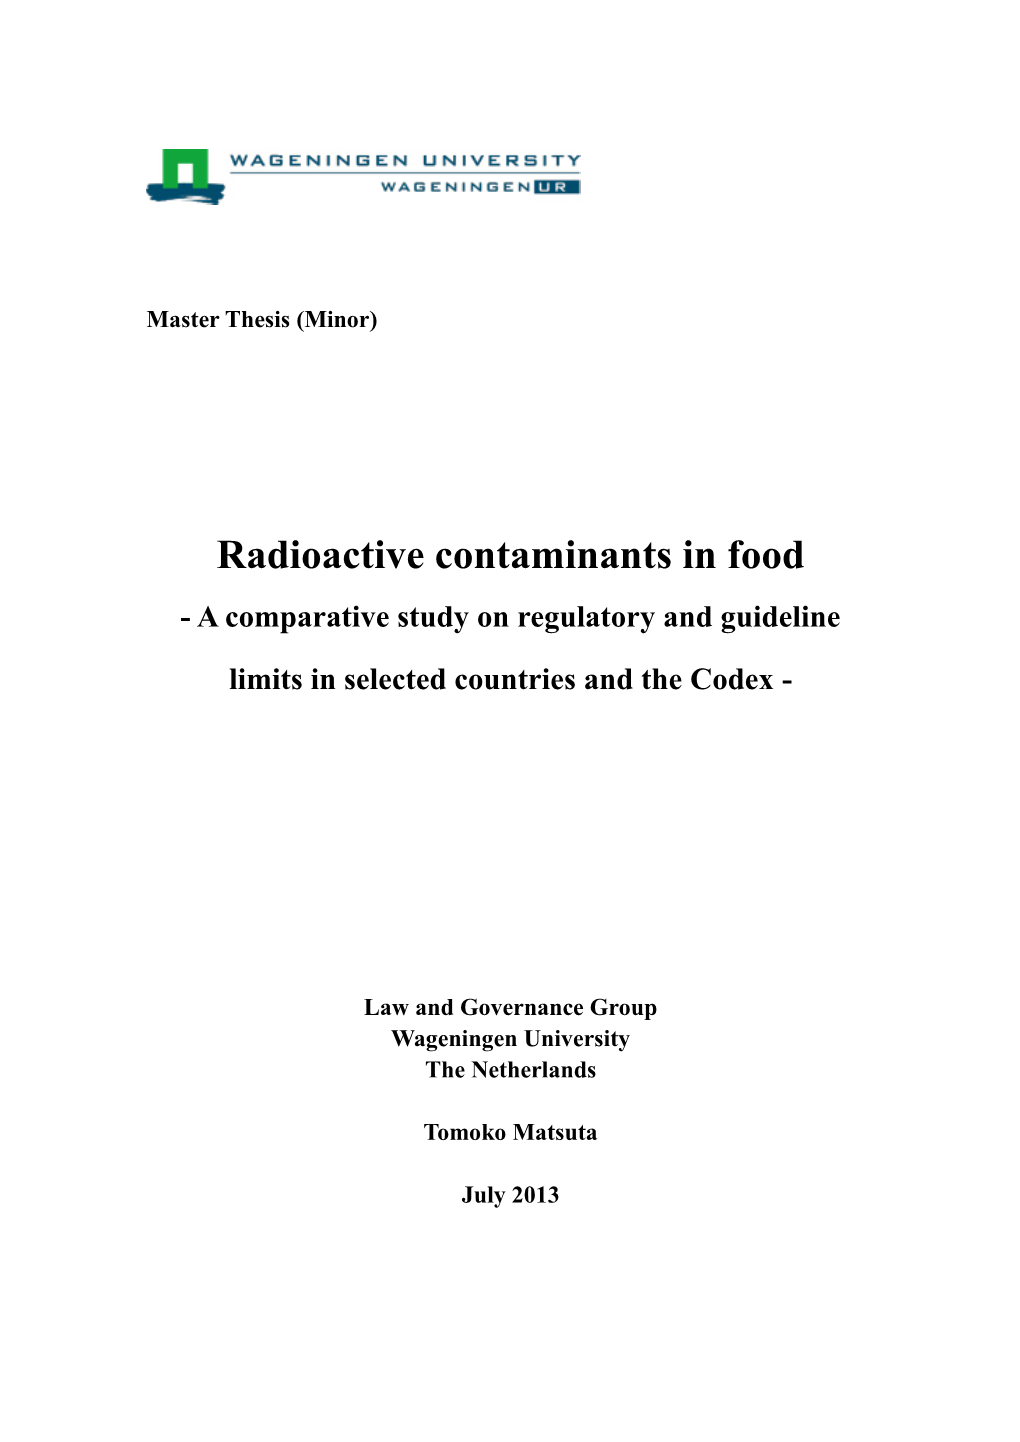 Radioactive Contaminants in Food - a Comparative Study on Regulatory and Guideline